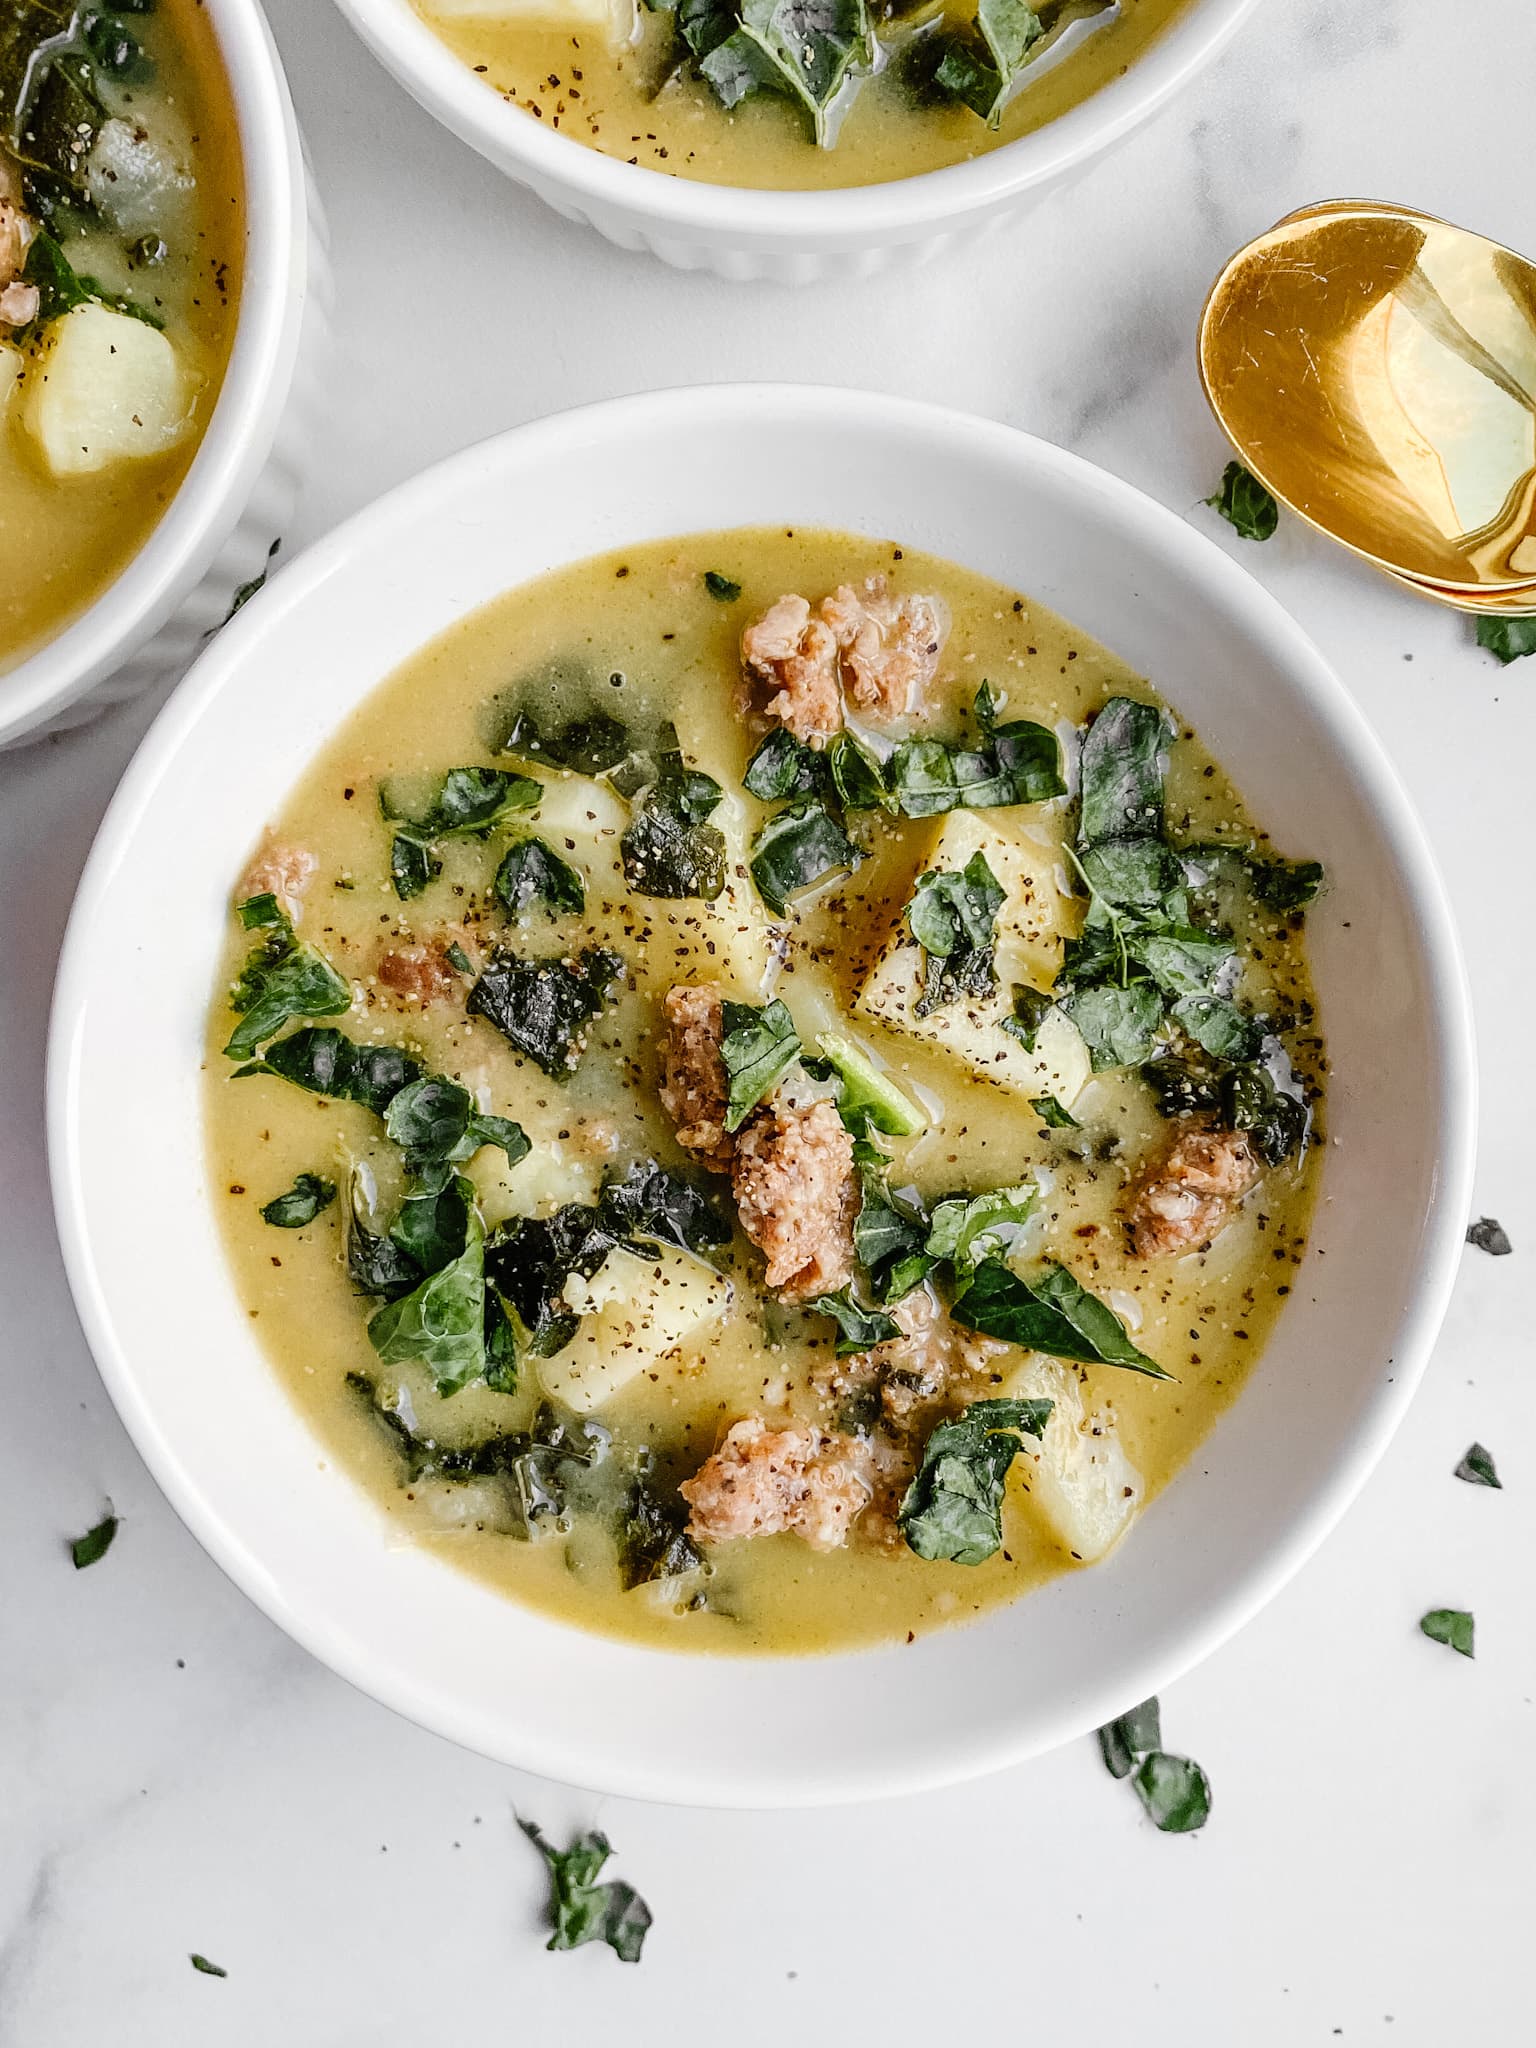 zuppa toscana with large chunks of spicy sausage, white sweet potatoes, and kale.